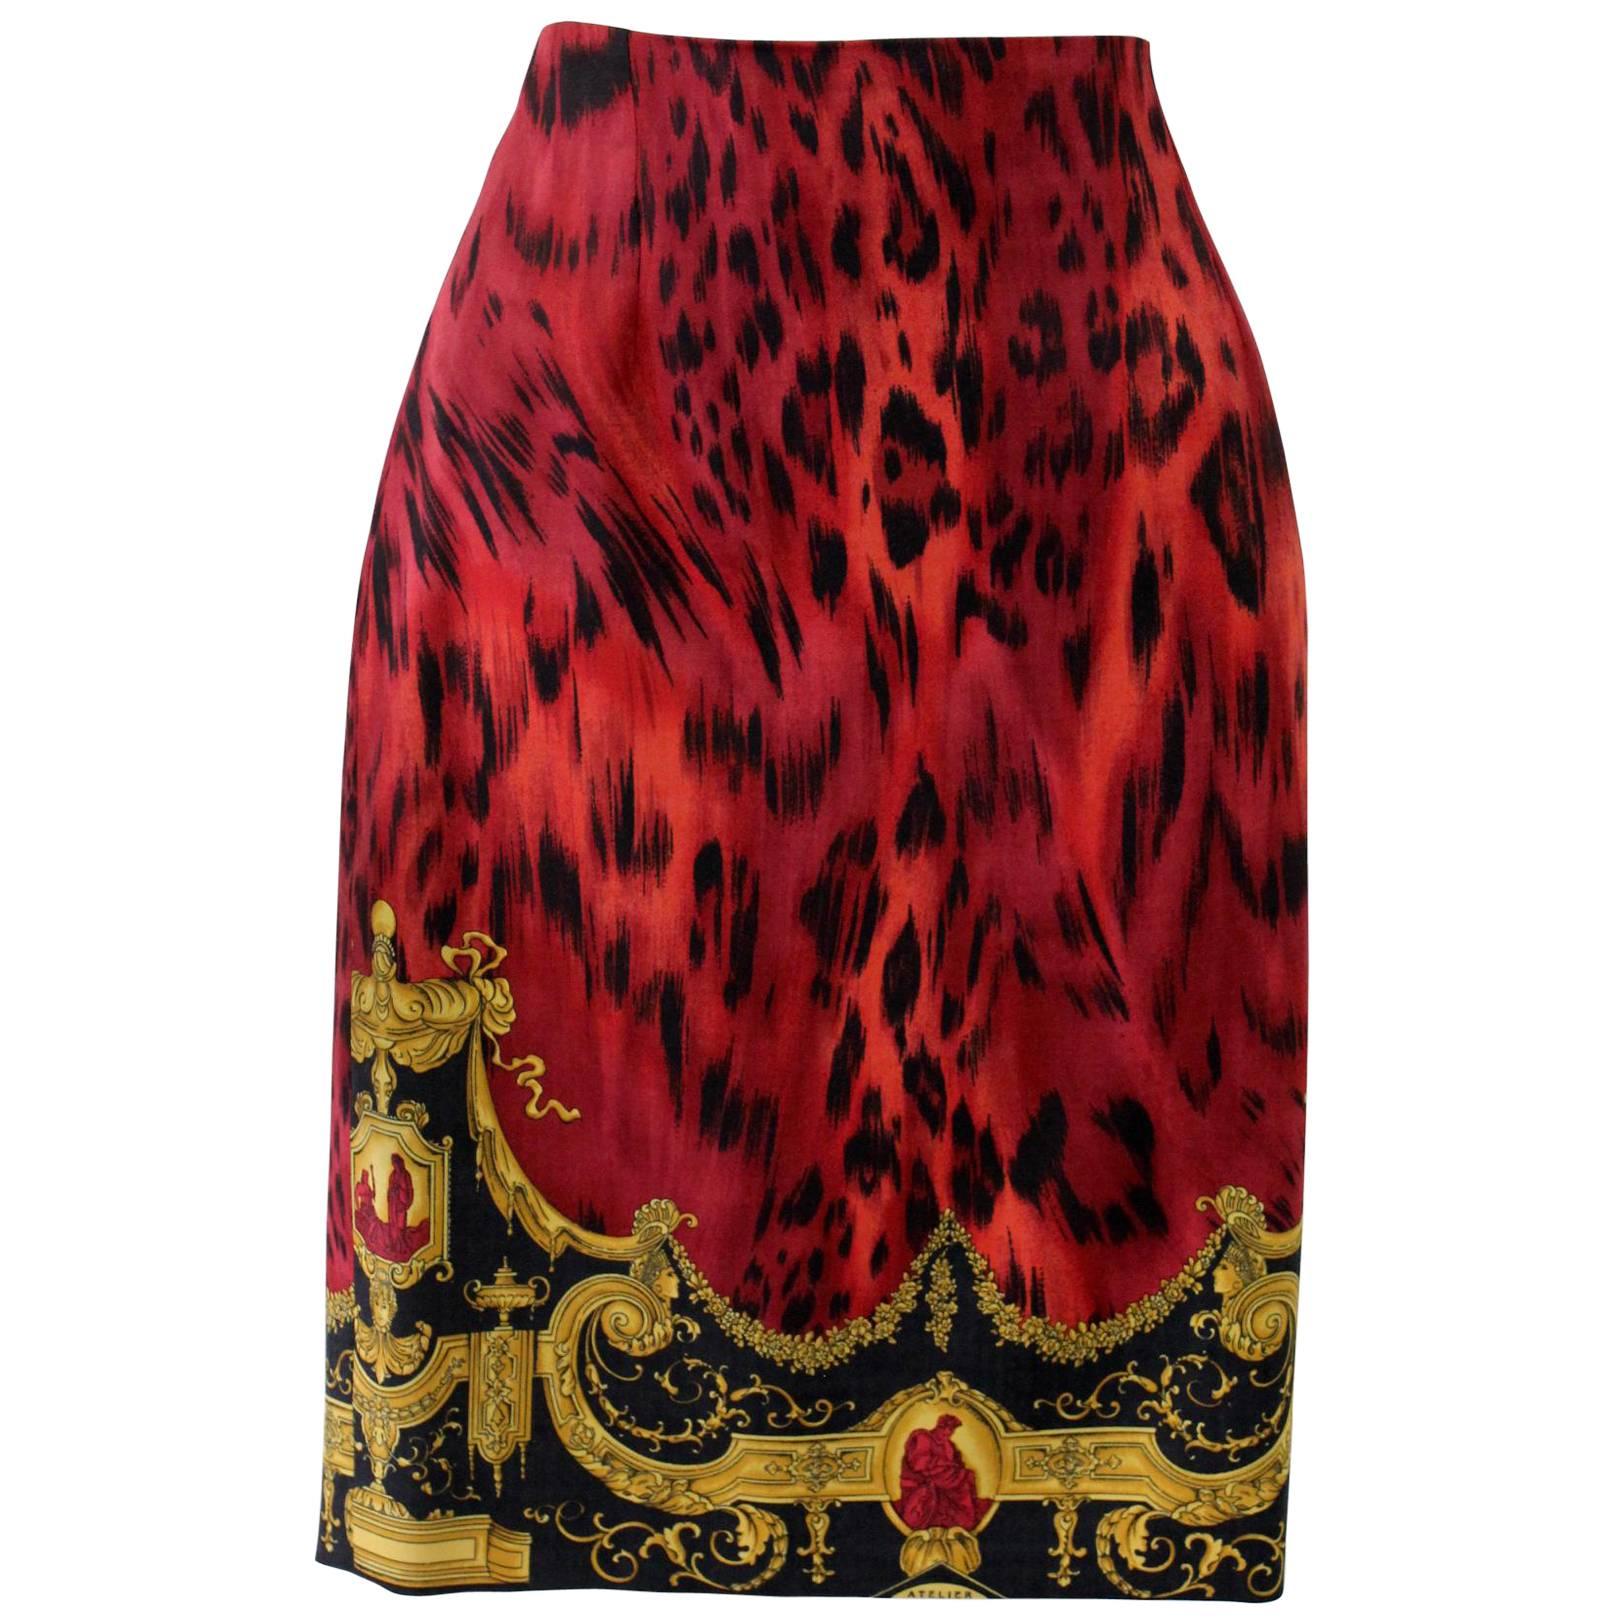 Istante By Gianni Versace Bondage Collection Skirt Fall 1992 For Sale